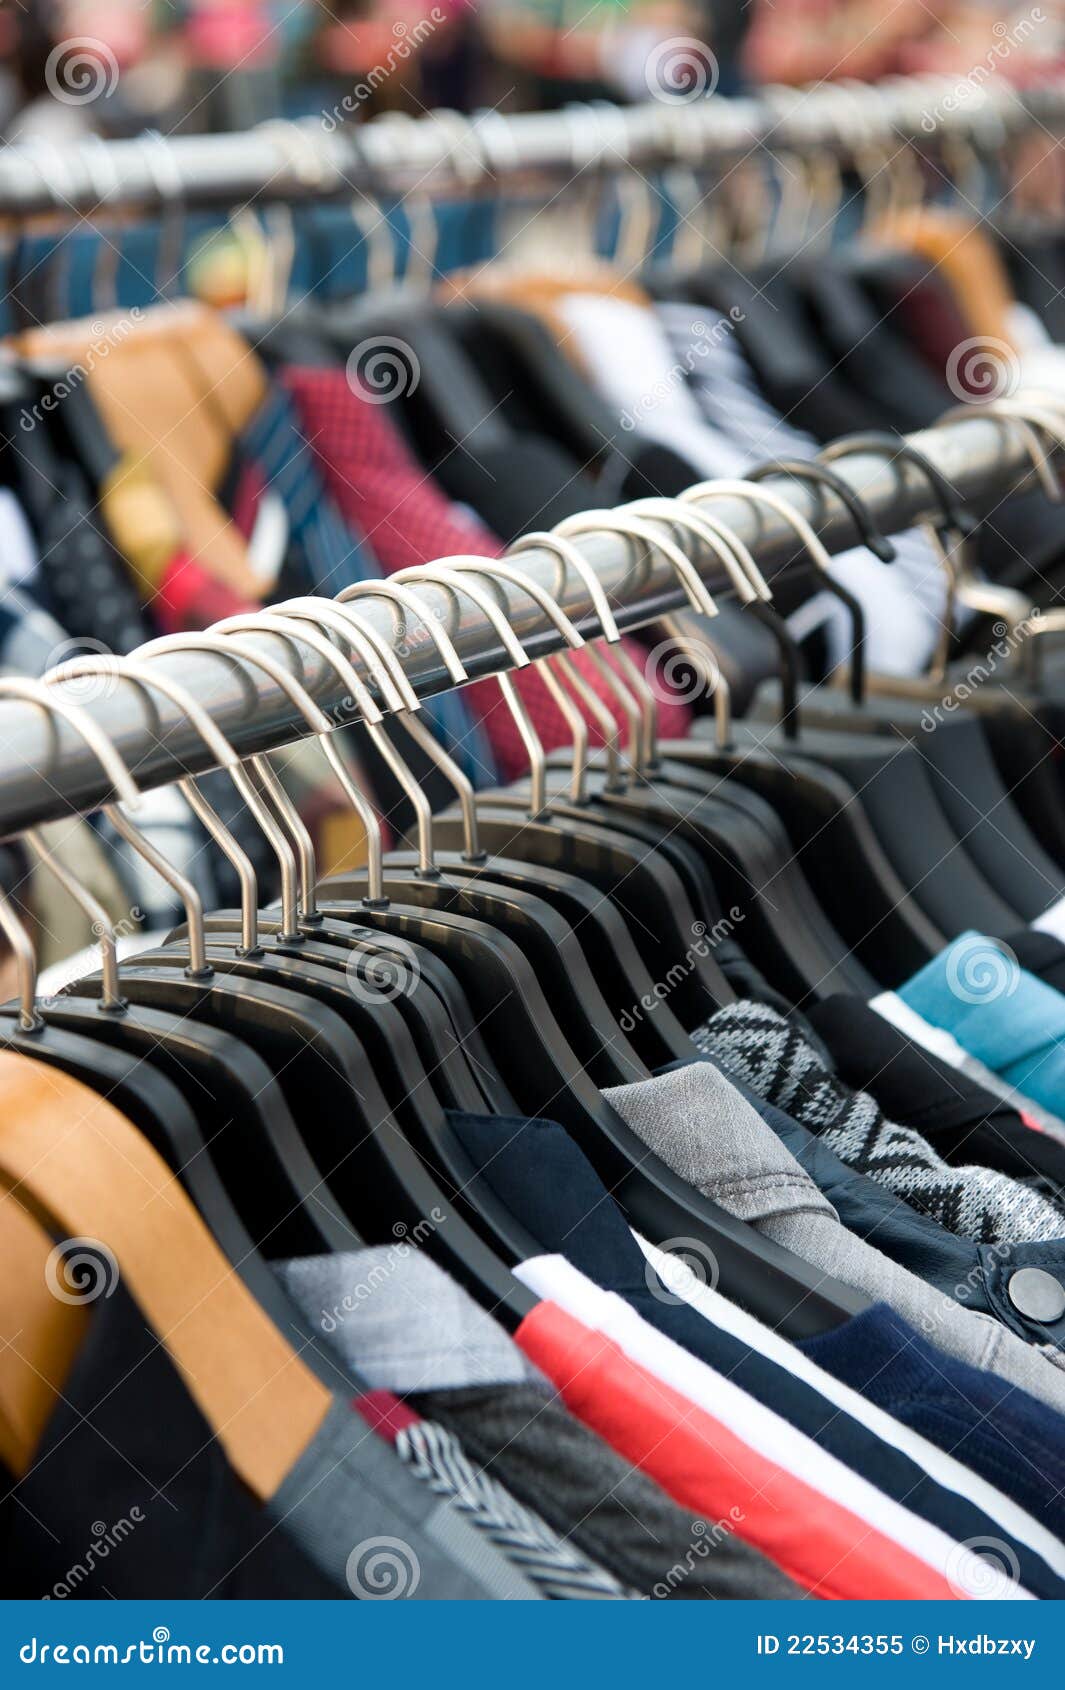 Clothes on racks stock image. Image of costume, boutique - 22534355